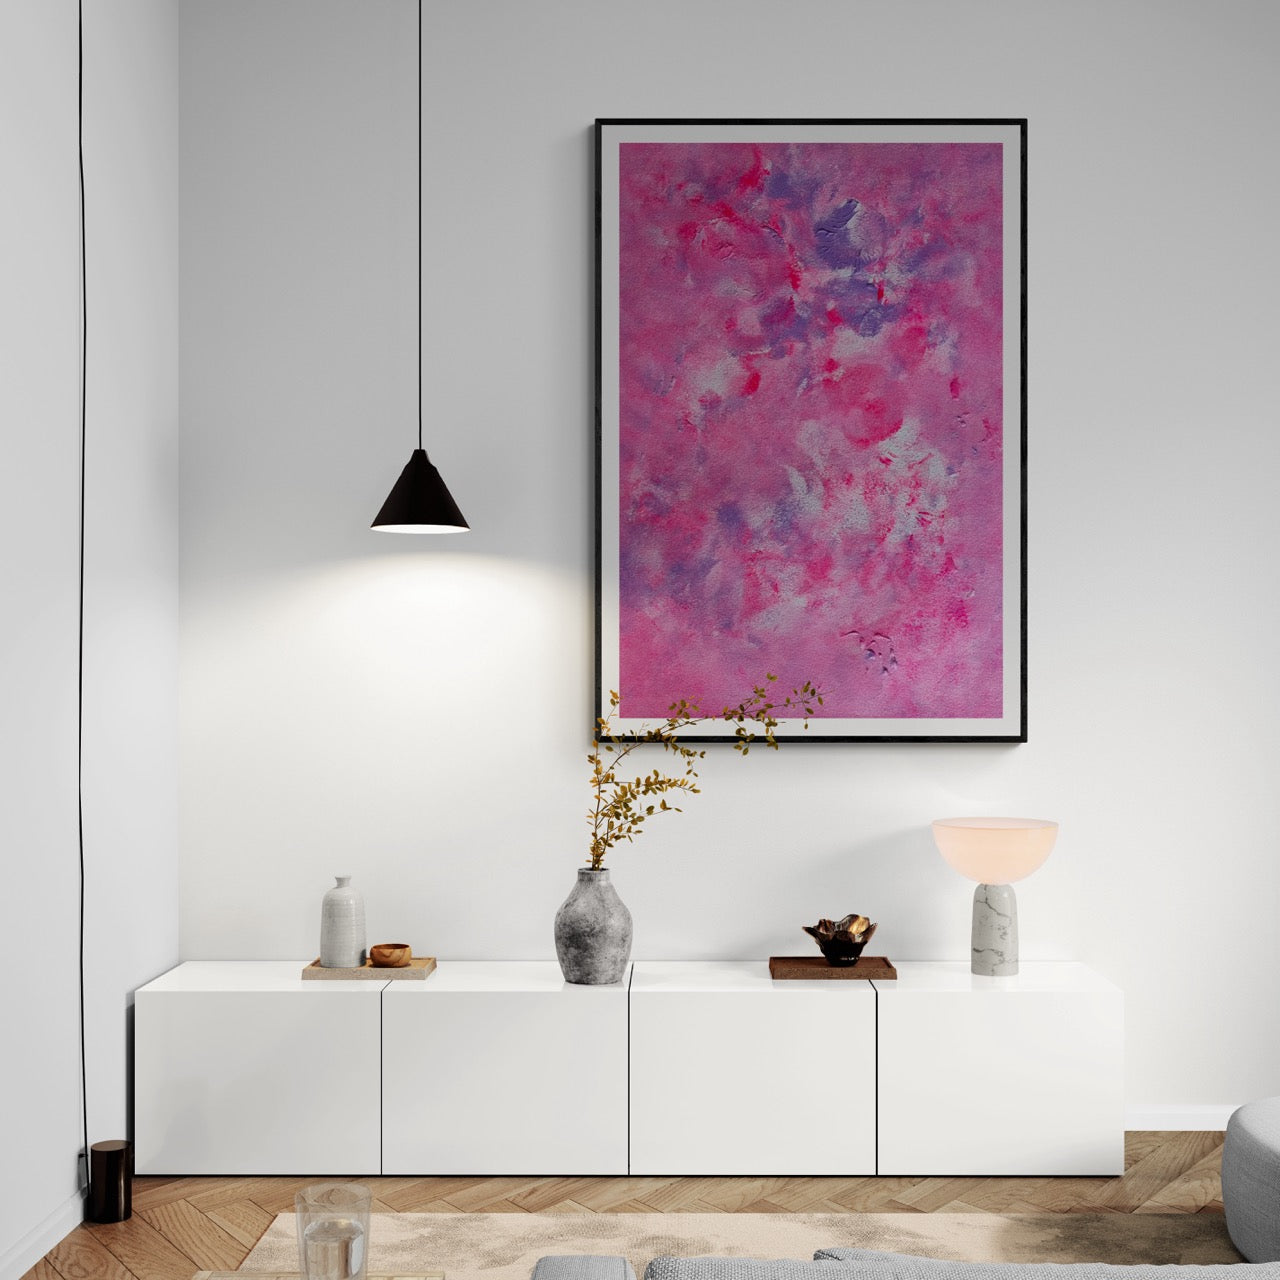 Pink, purple and white abstract art poster with a black frame hanging vertically on a white wall in a modern and minimalistic living room with white and black furniture and wood and herringbone patterned floor